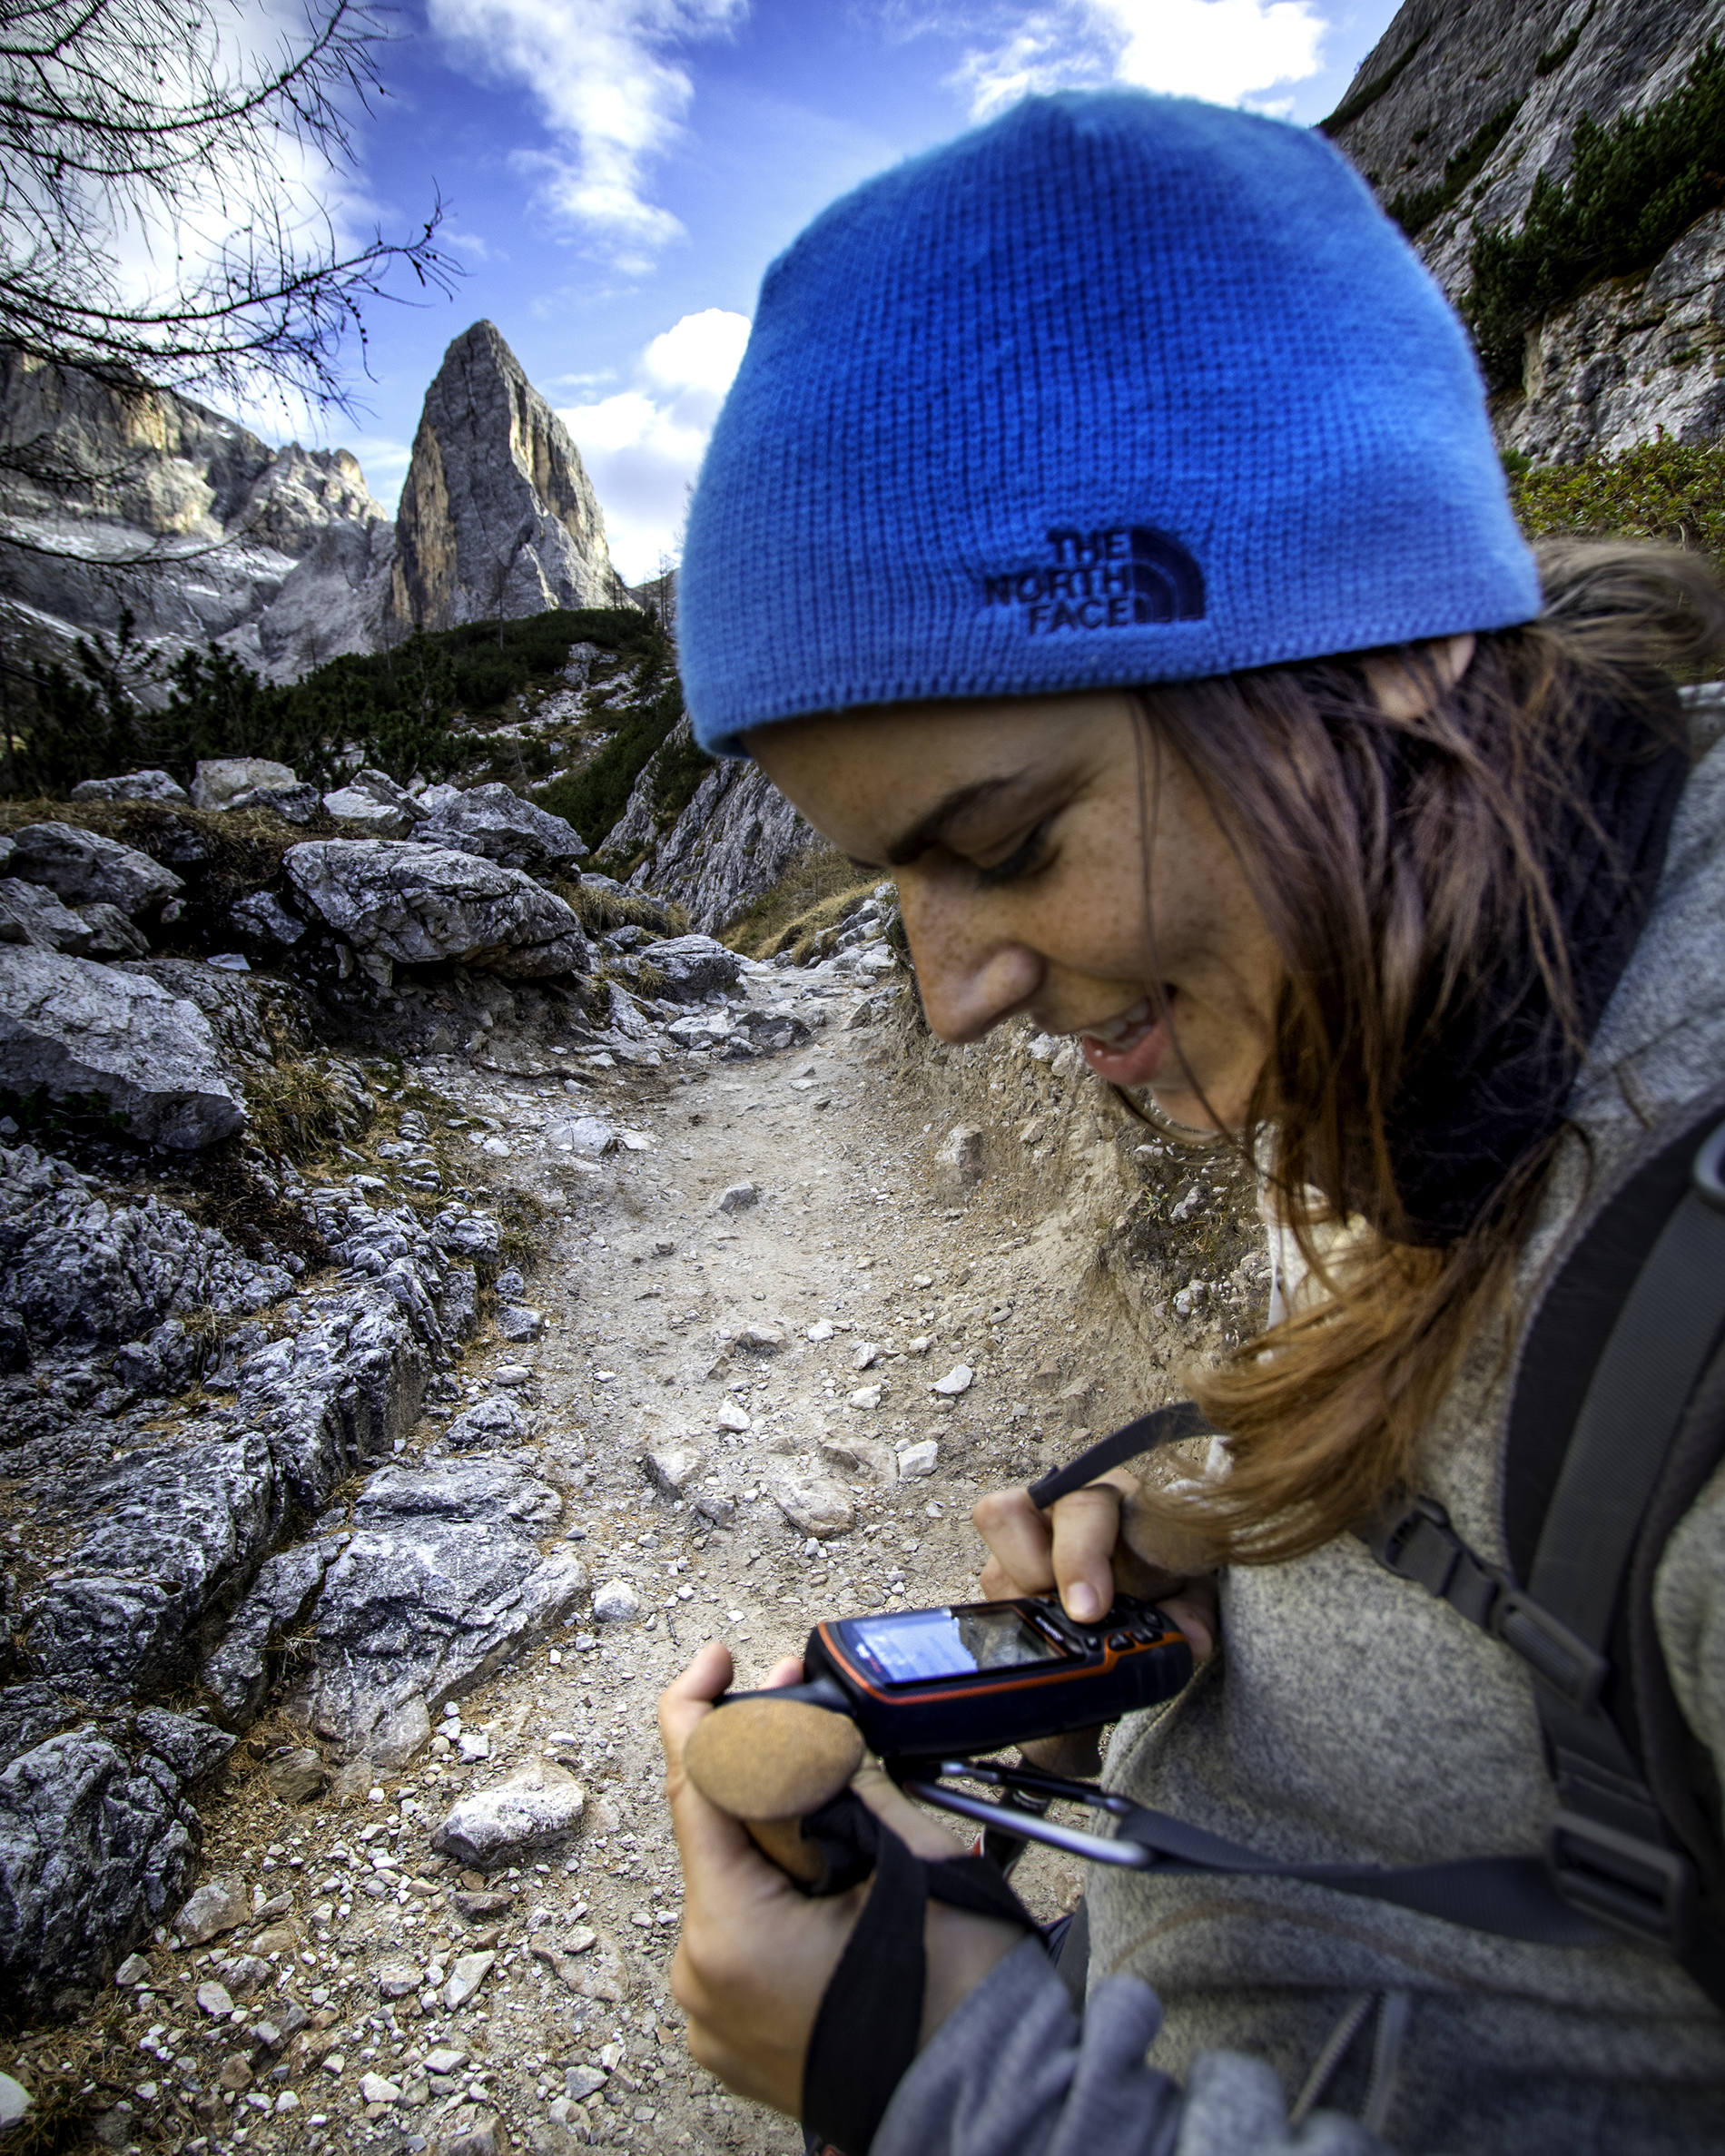 Woman looking at Garmin GPS in the Dolomites